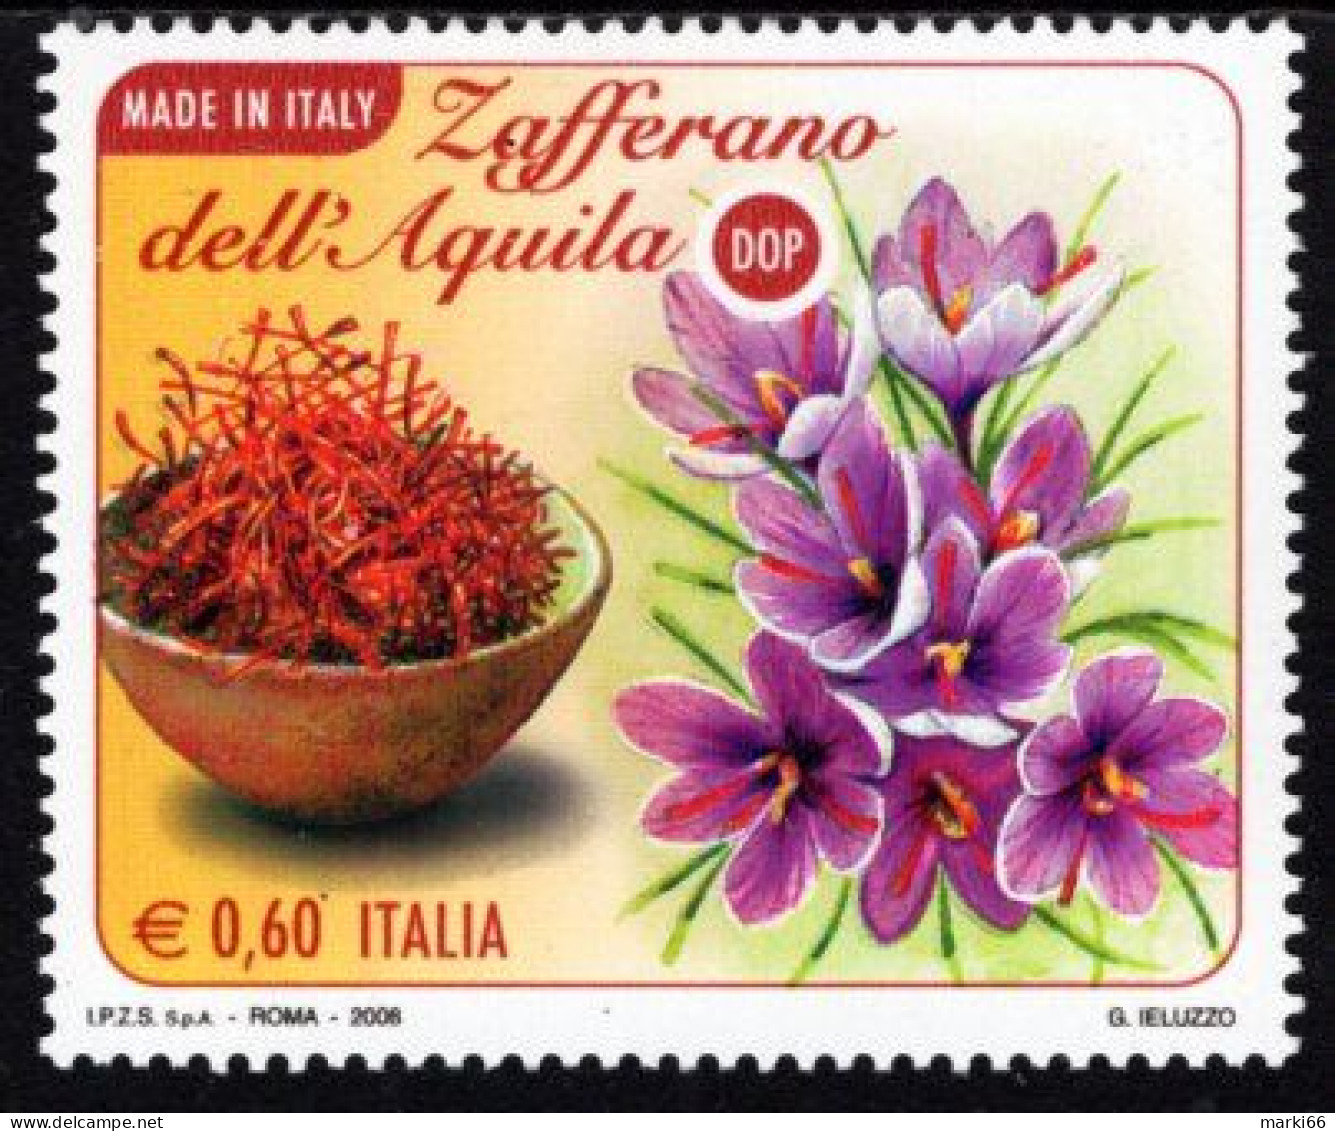 Italy - 2008 - Made In Italy - Saffron Of Aquila - Mint Stamp - 2001-10:  Nuevos